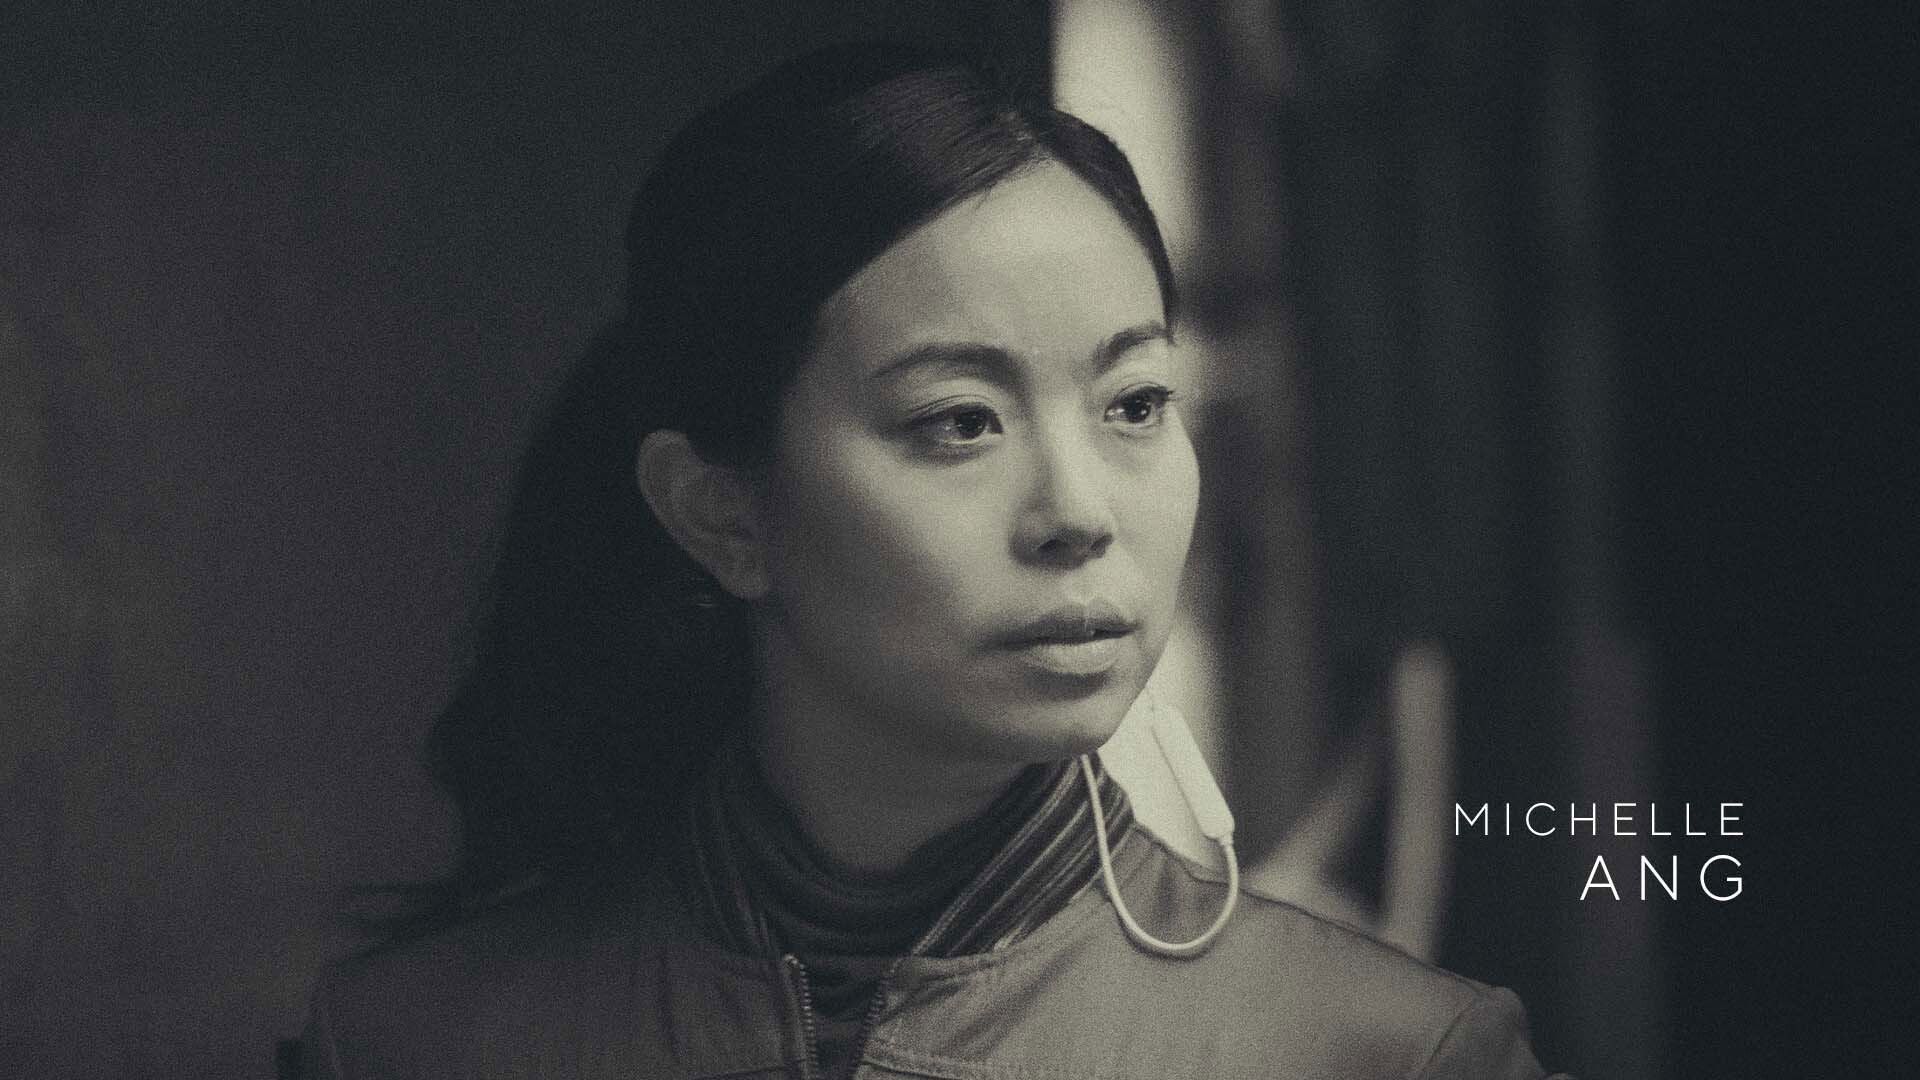 Michelle Ang as Dr. Ling Hai in 